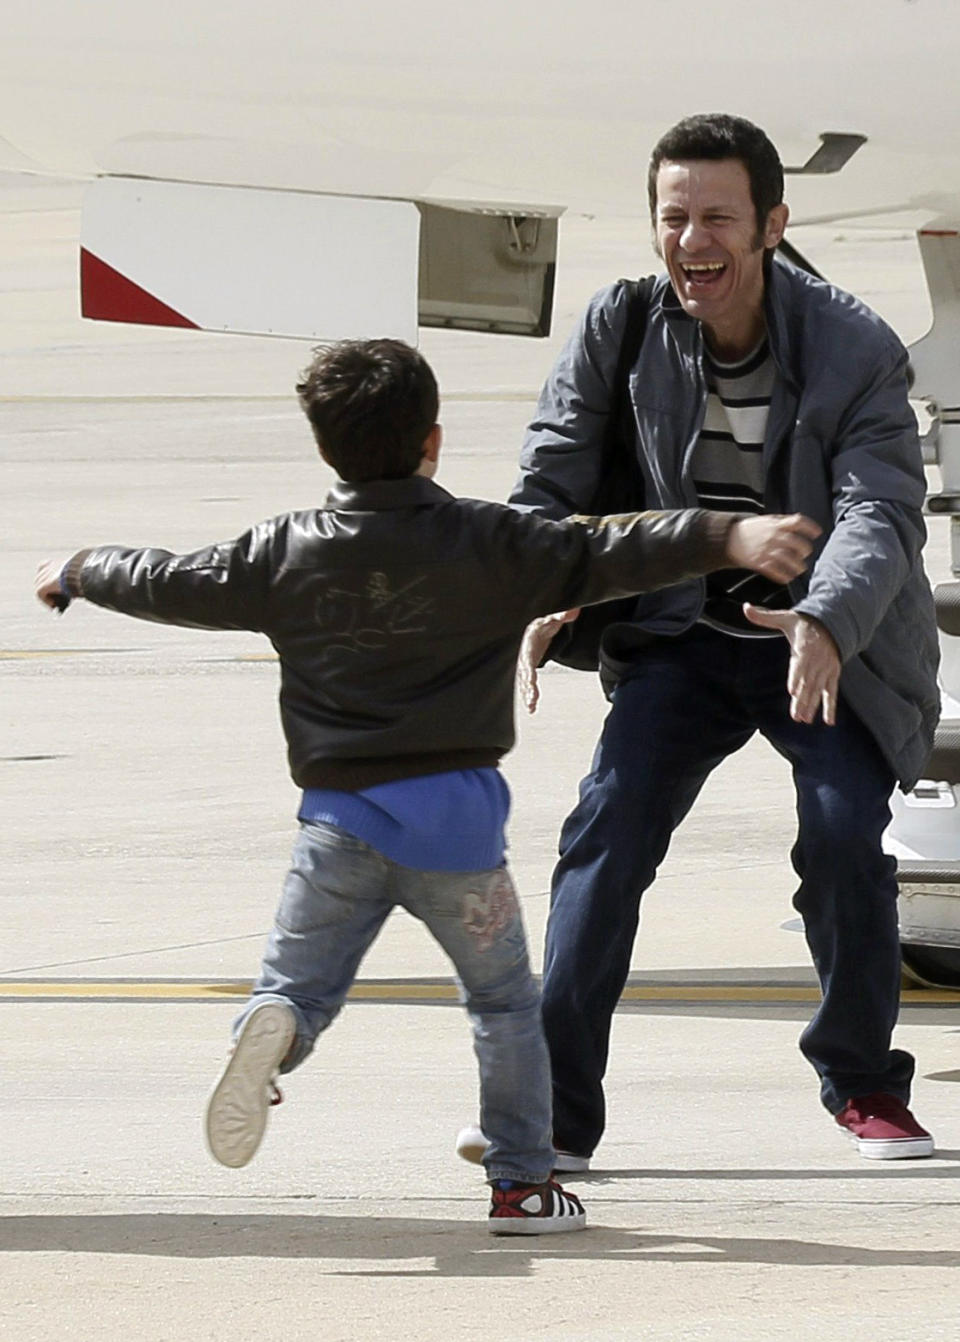 Spanish reporter Javier Espinosa, reacts as his soon Yerai runs towards him upon his arrival at the military airport of Torrejon in Madrid, Spain, Sunday, March 30, 2014. Two Spanish journalists who were freed after being kidnapped for more than six months in Syria by a rogue al-Qaida group are flying back home Sunday, Spain’s Defense Ministry said. The El Mundo newspaper reported earlier that its war correspondent Javier Espinosa made contact late Saturday from Turkey, where he and photographer Ricardo Garcia Vilanova were under military protection. (AP Photo/Paco Campos, Pool)